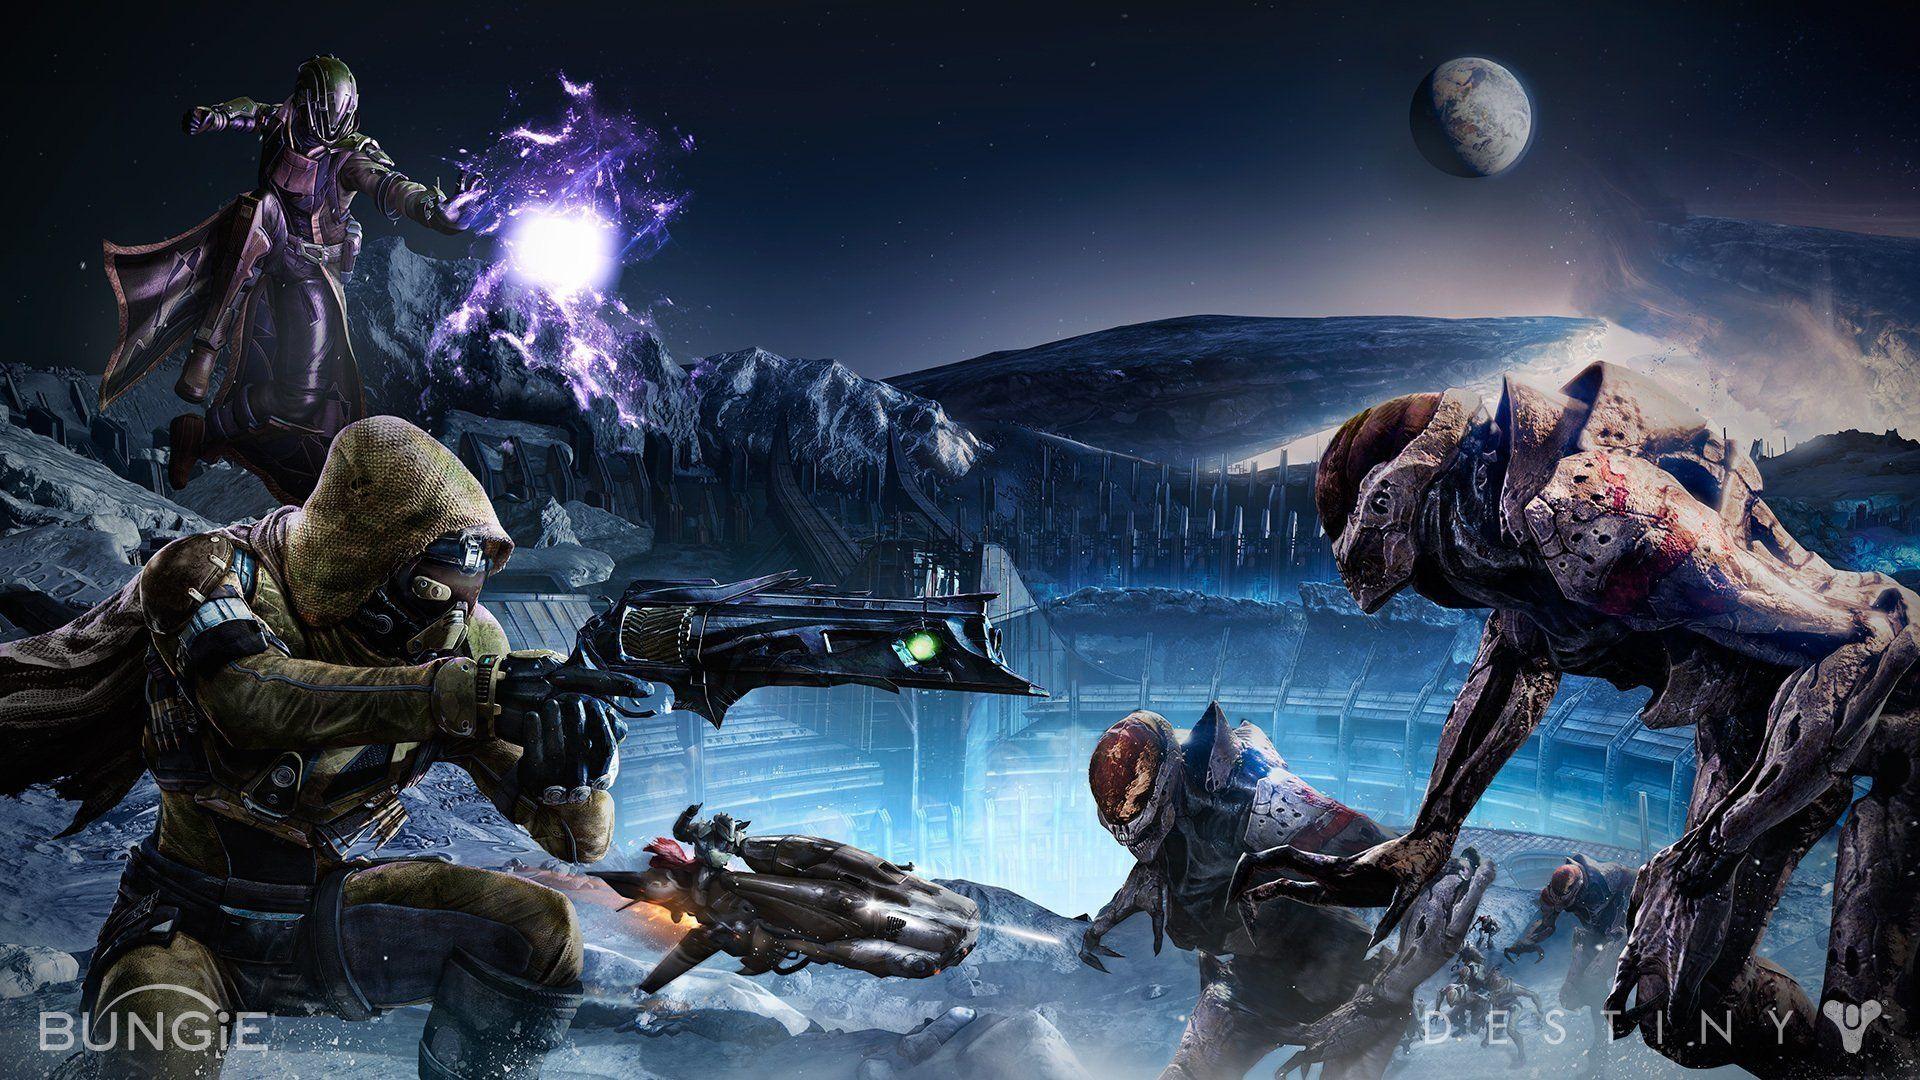 Destiny HD Wallpaper and Background Image